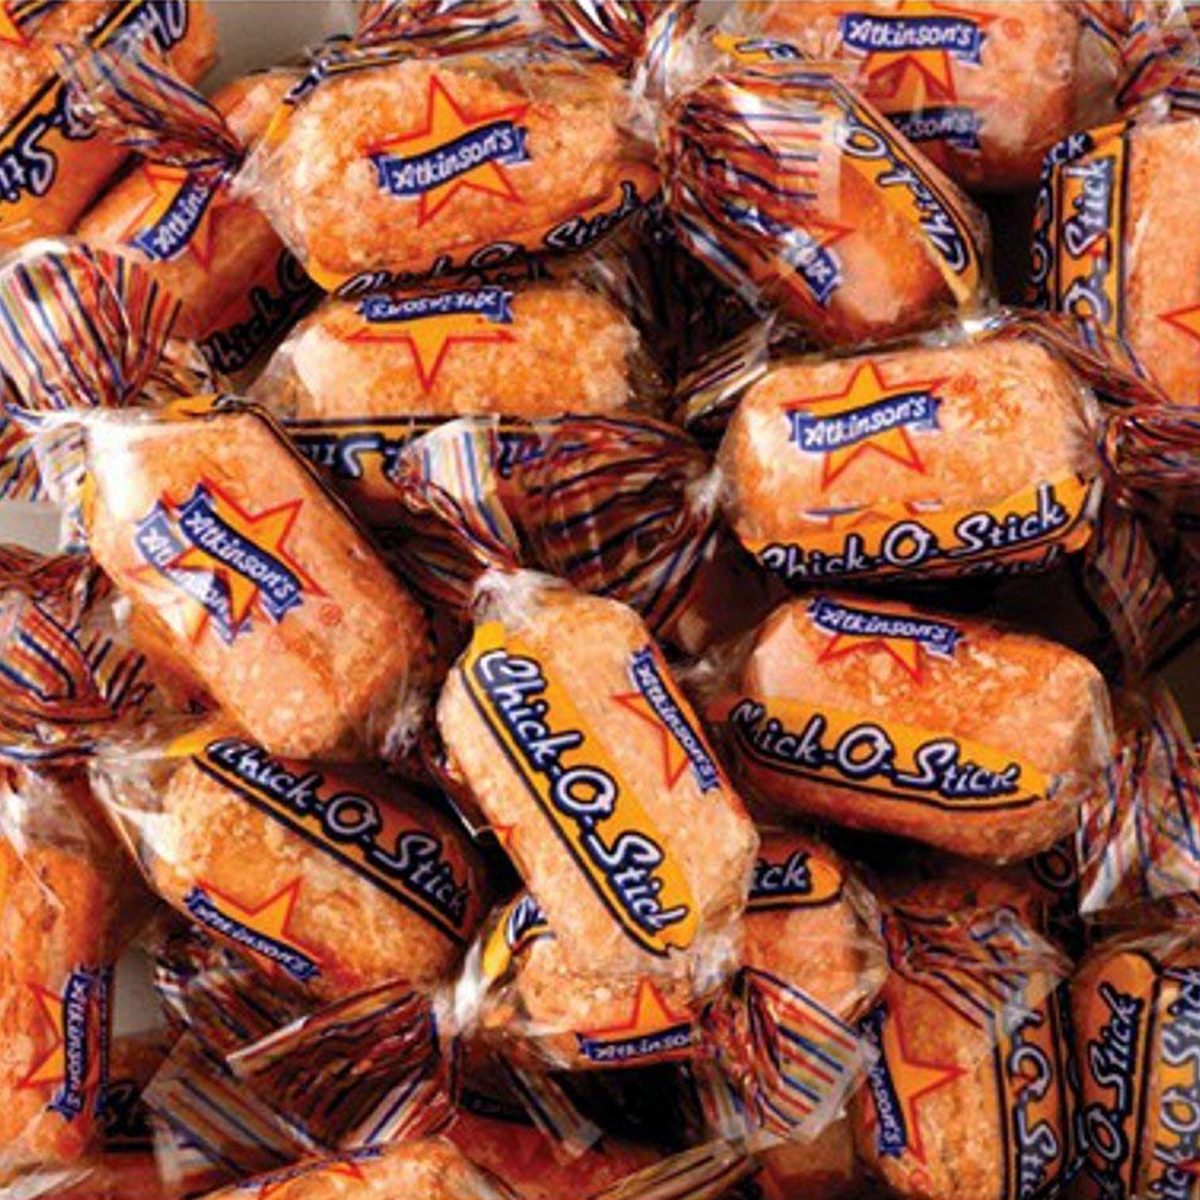 Tumtum - Old Dutch candy from grandma is our specialty, a variety